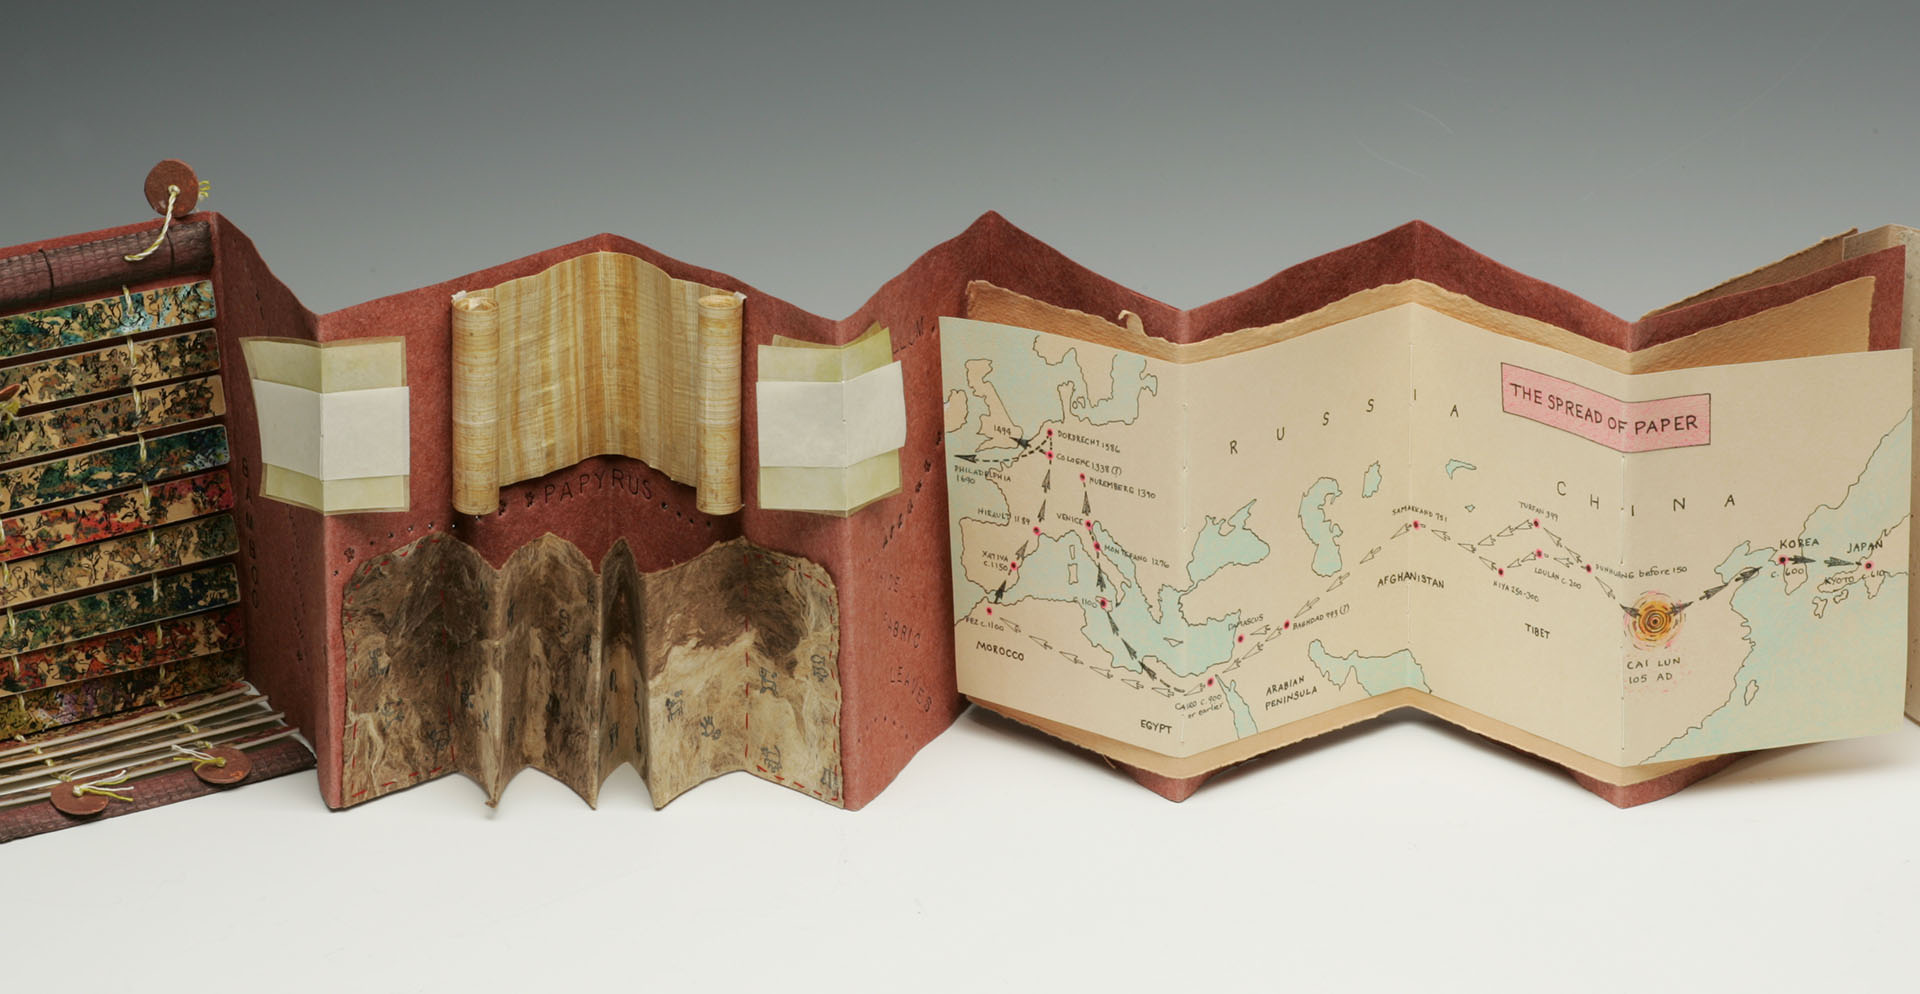 Early writing substrates: papyrus, bark paper and vellum. A map shows the invention of paper in China and how it began to spread globally.